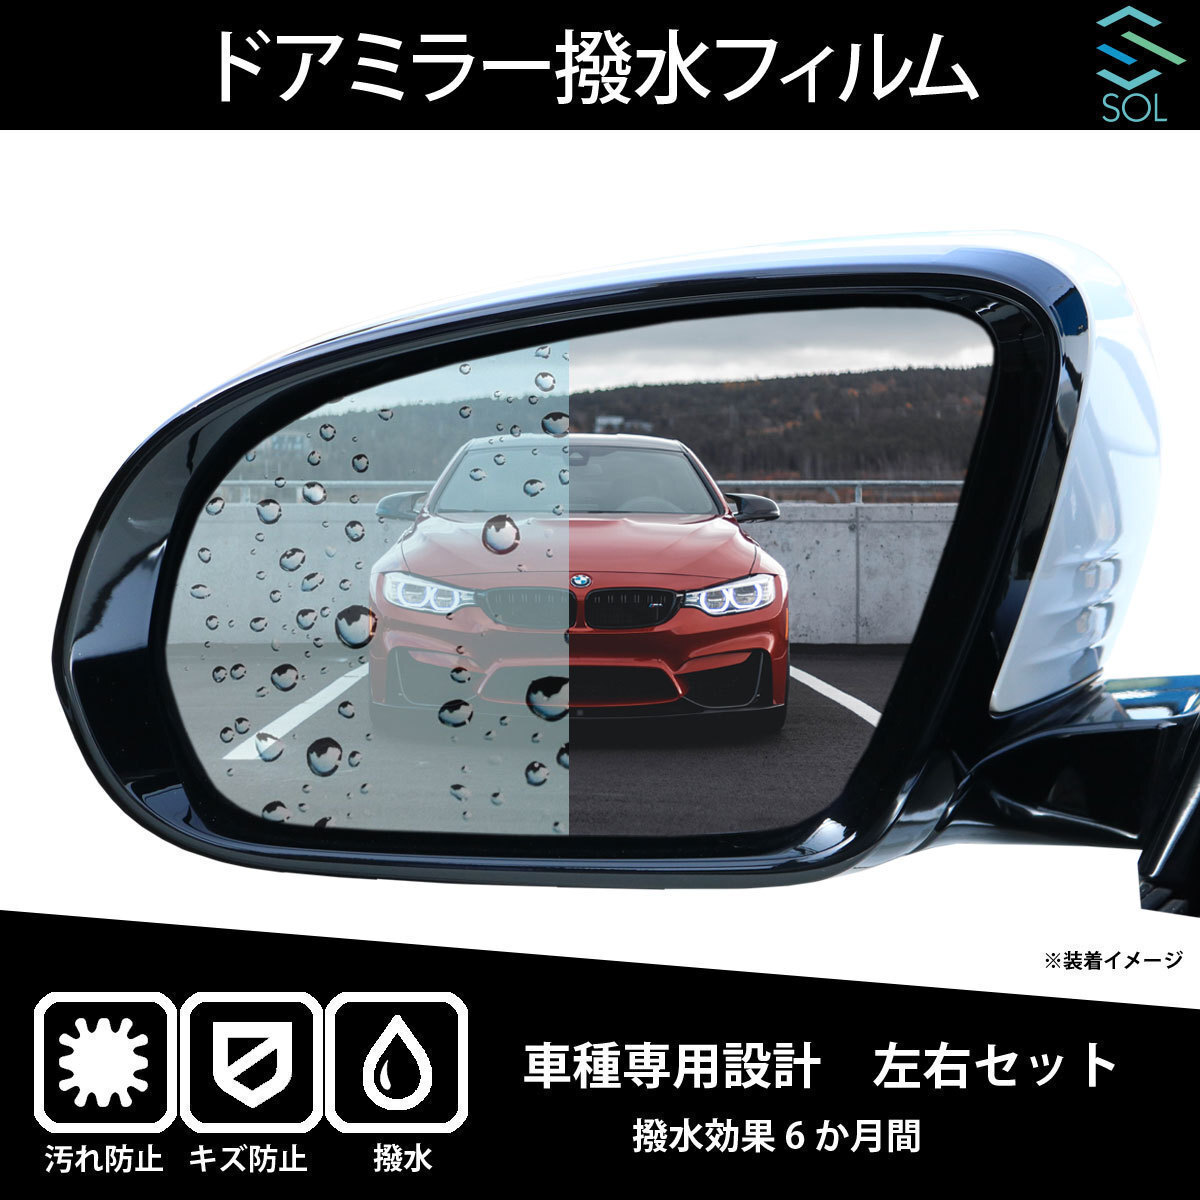  postage 185 jpy car make exclusive use Porsche Boxster 08~12 997 model 08~11 exclusive use water-repellent door mirror film left right set water-repellent effect 6 months shipping deadline 18 hour 